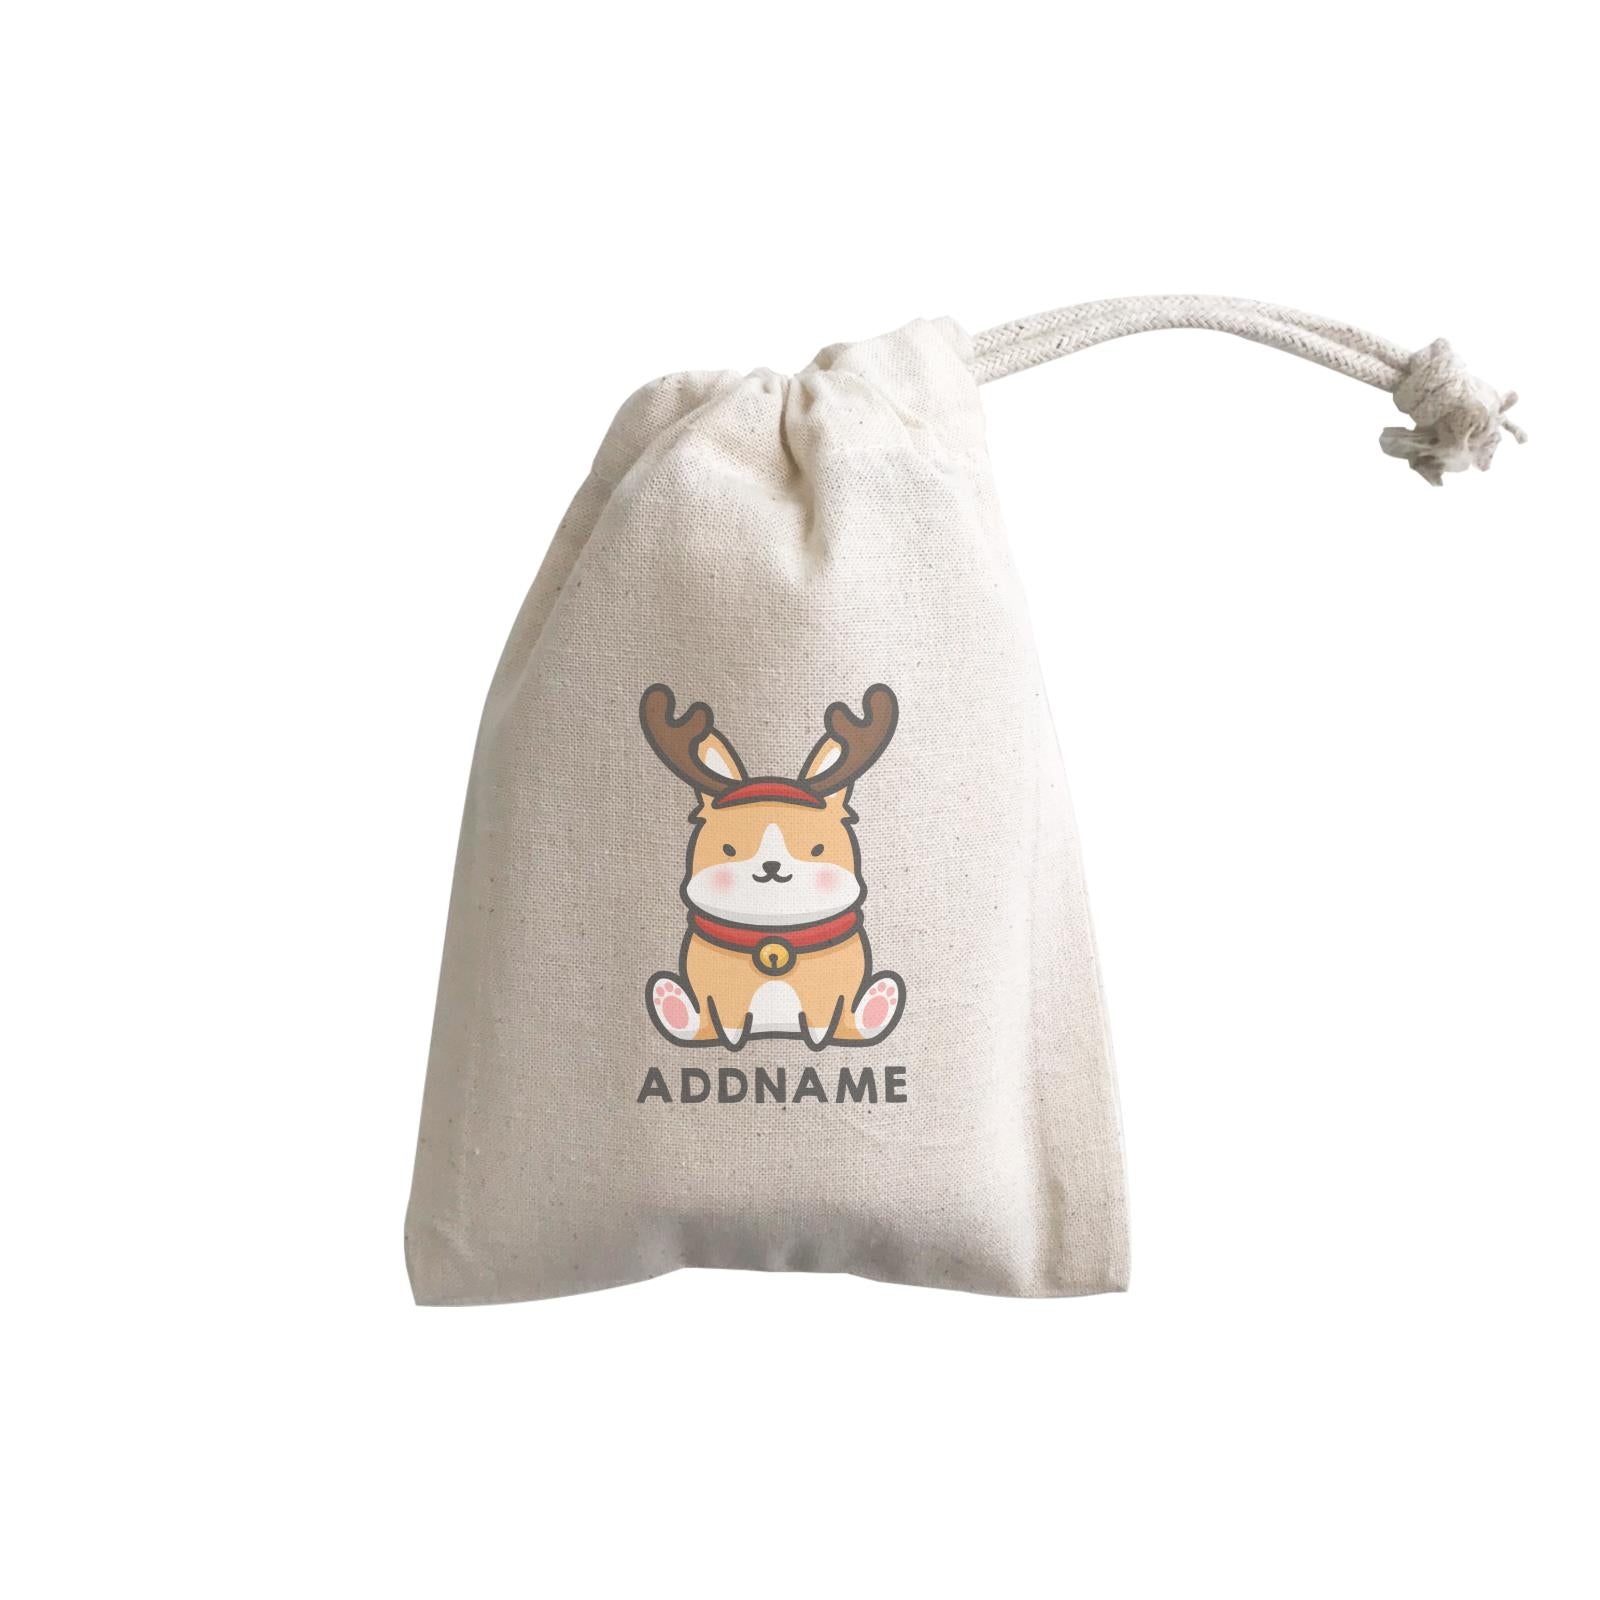 Xmas Cute Dog With Reindeer Antlers Addname GP Gift Pouch